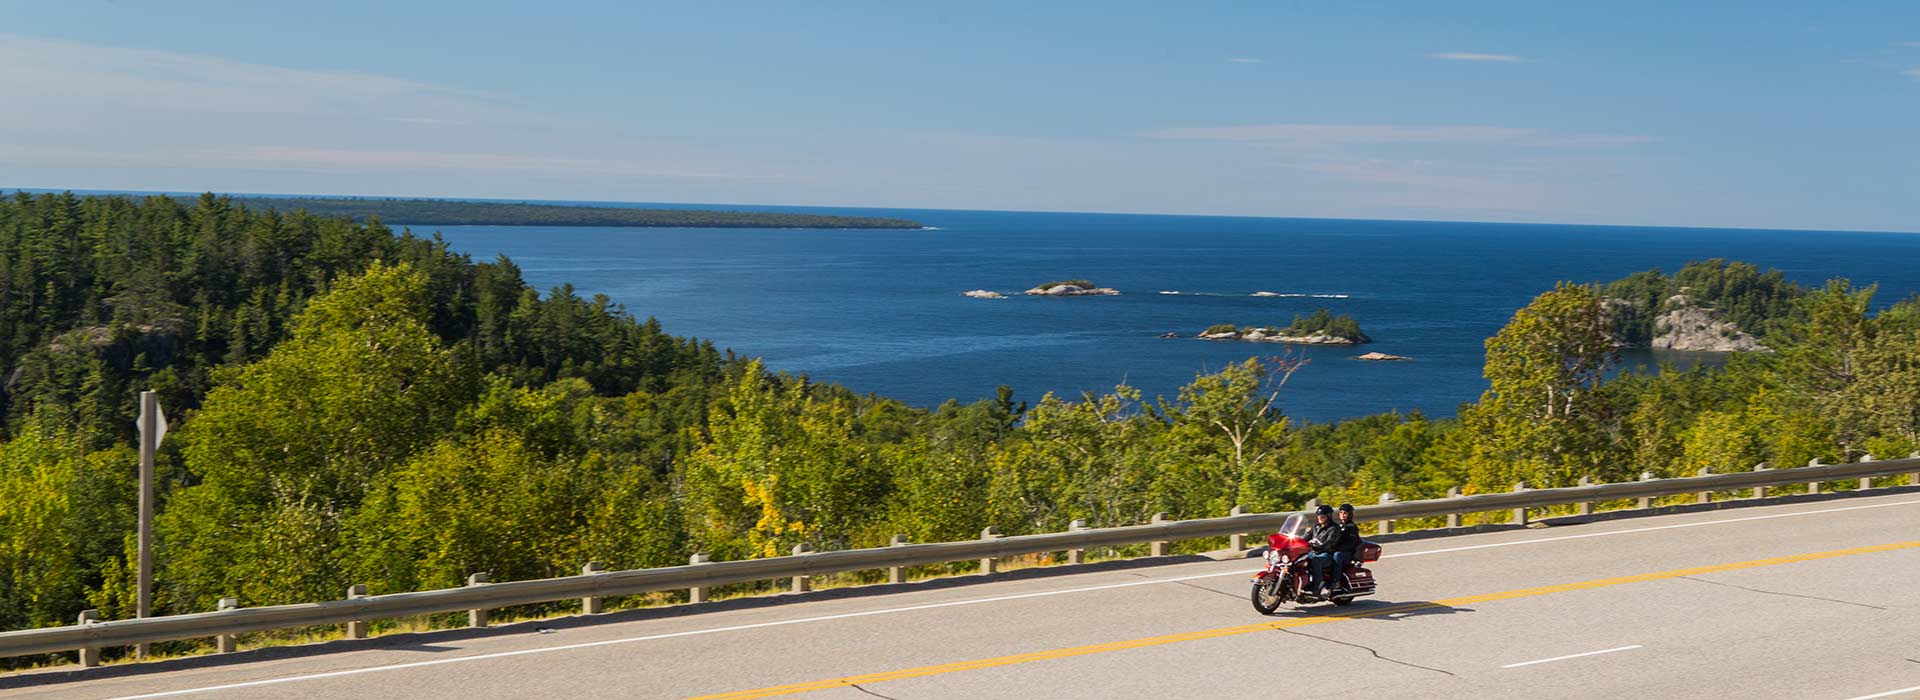 Exploring Ontario's Beauty on a Motorcycle